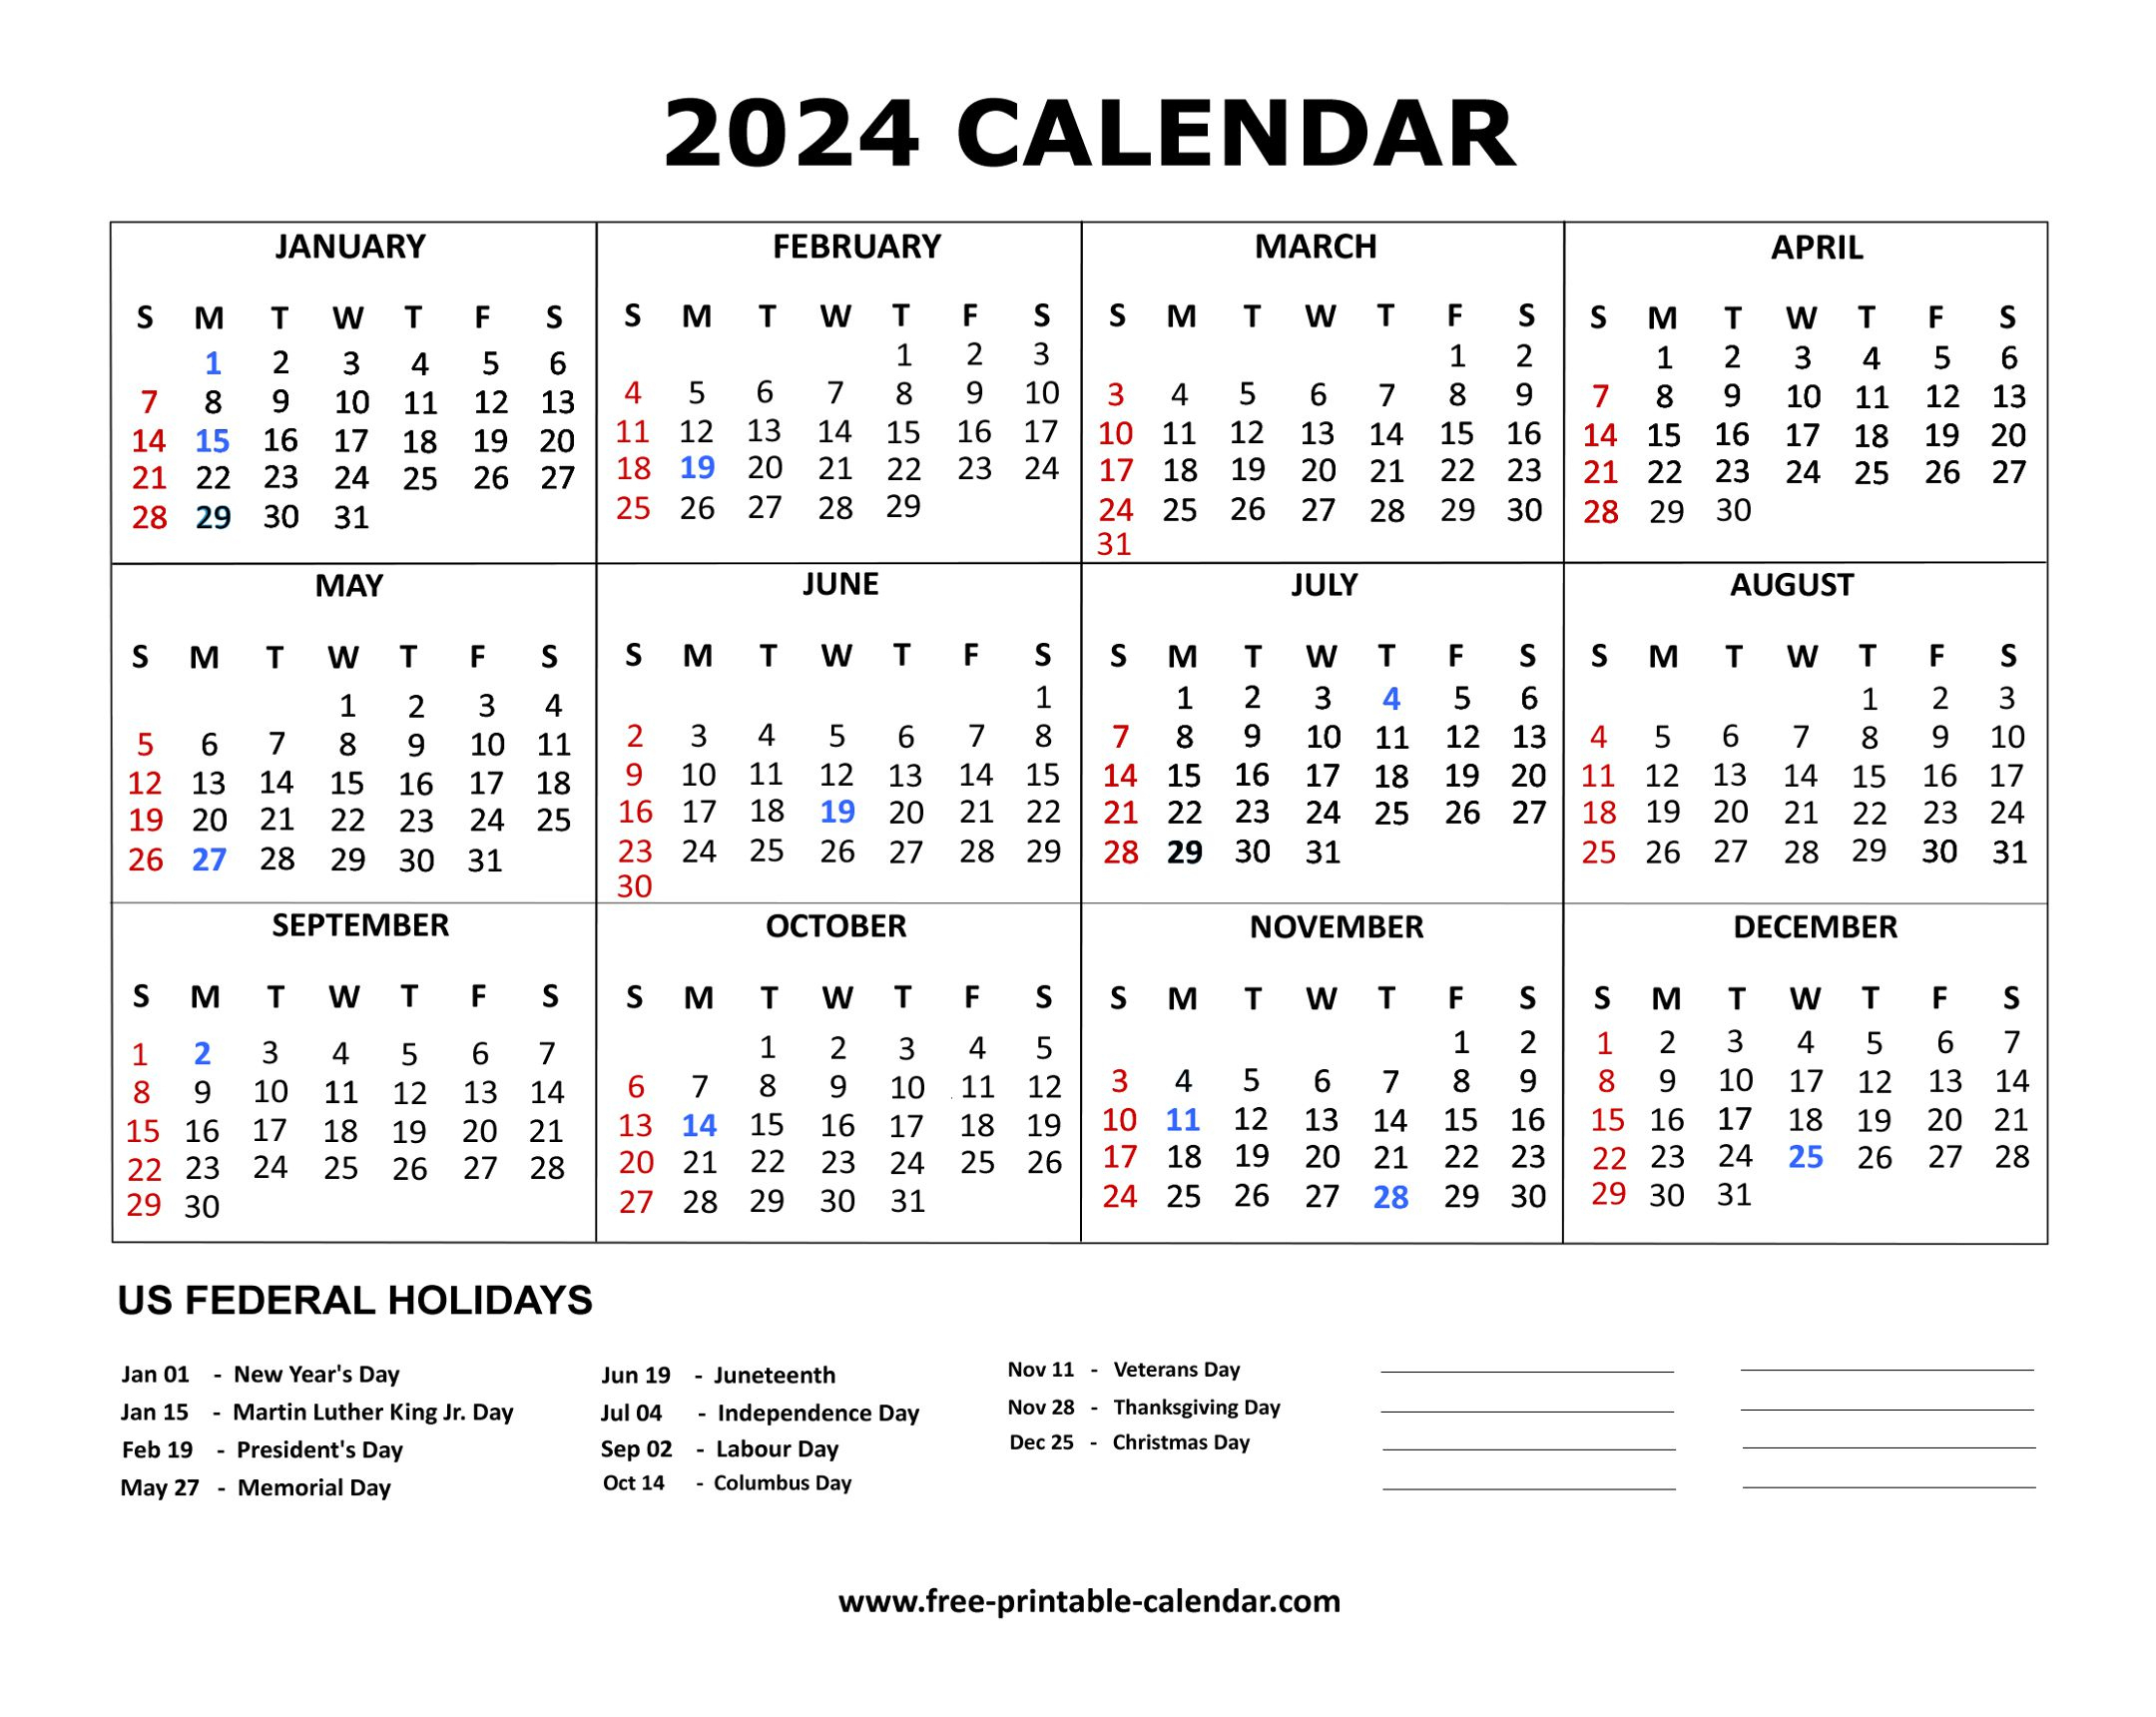 2024 Calendar | 2024 Printable Calendar One Page With Holidays Free Download